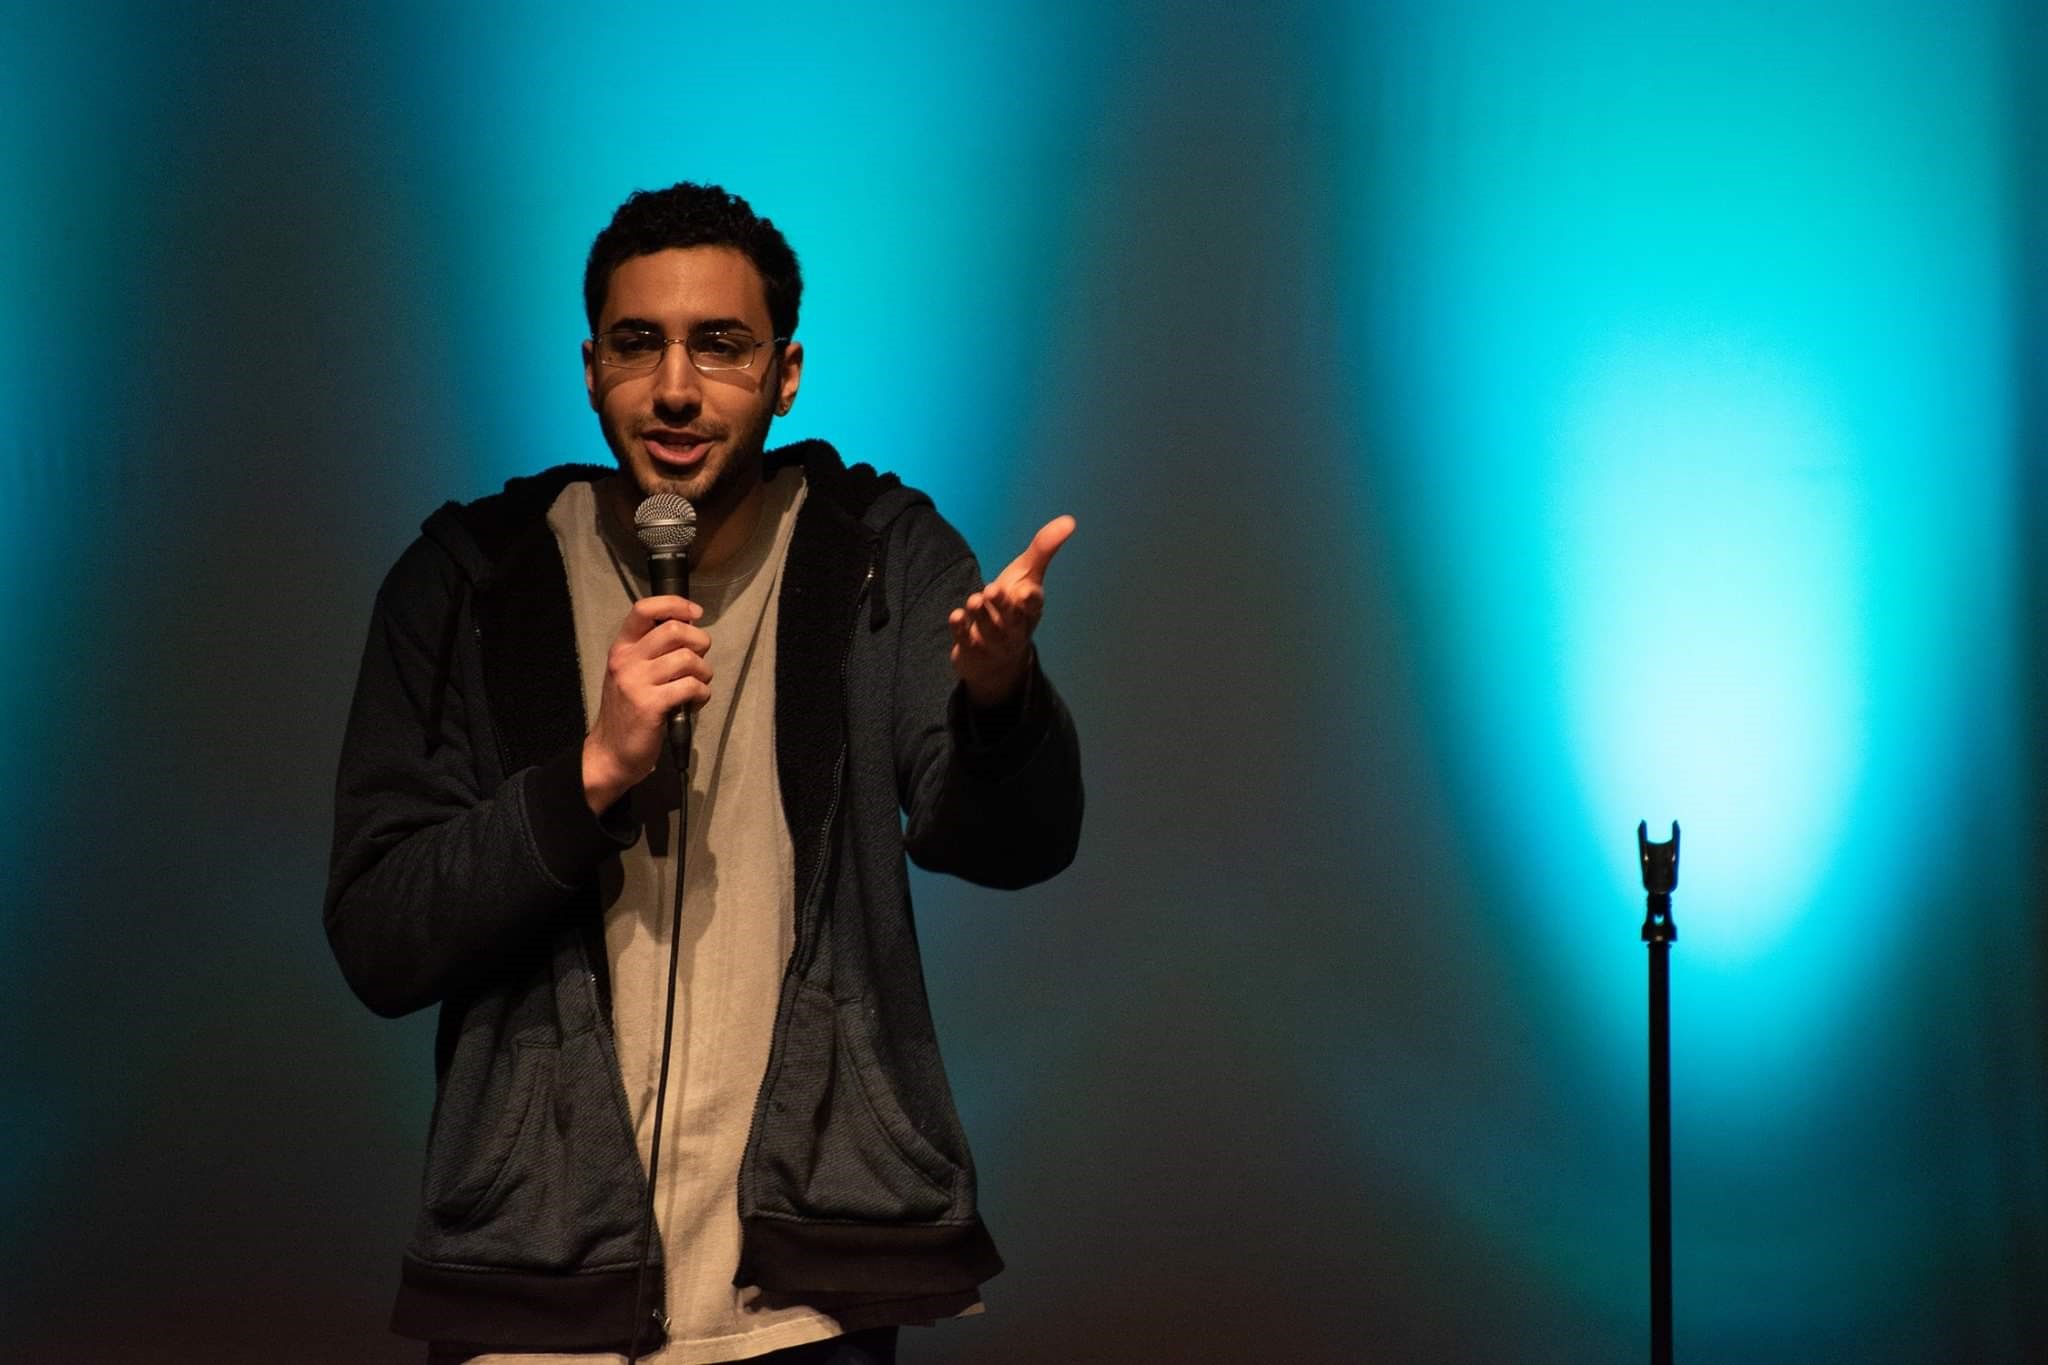  Ryan Nasser is a stand-up comedian. 